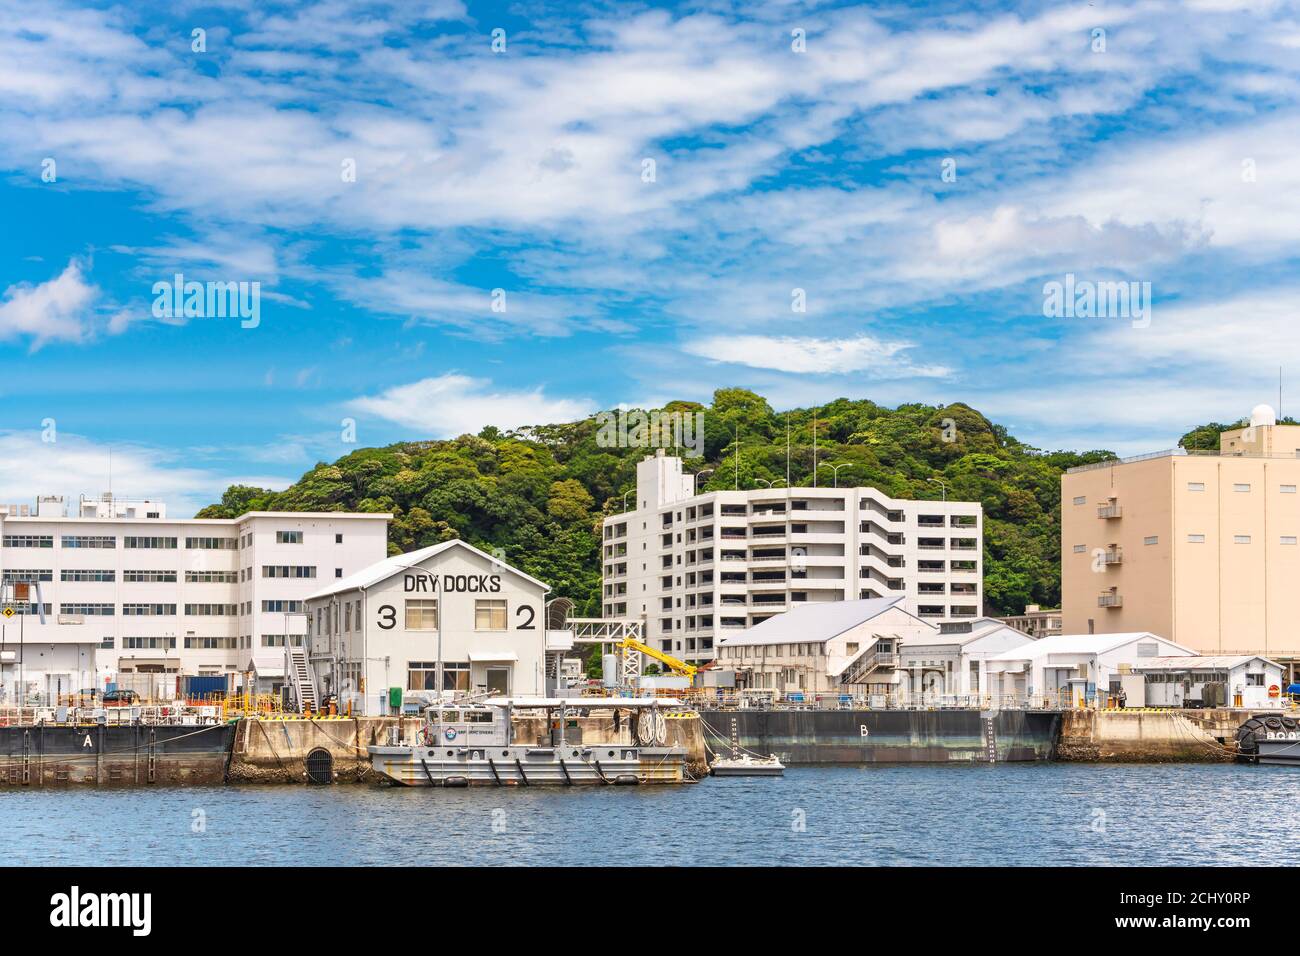 yokosuka, japan - july 19 2020: Diving support vessel DS-02 of the Ship Repair Facility and Japan Regional Maintenance Center SRF-JRMC berthed in fron Stock Photo